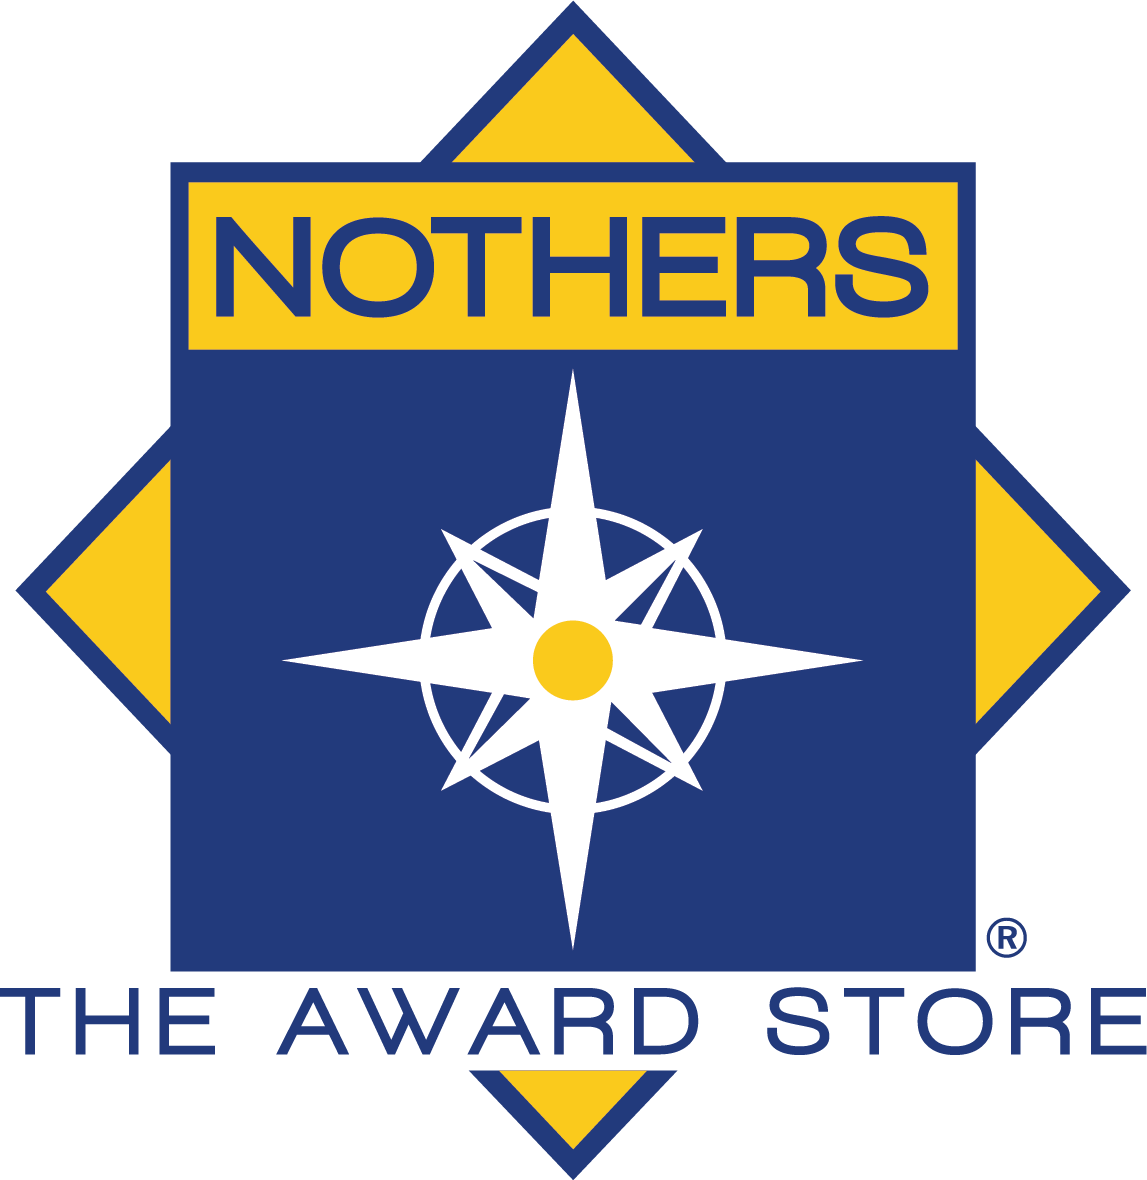 Nothers Awards Store